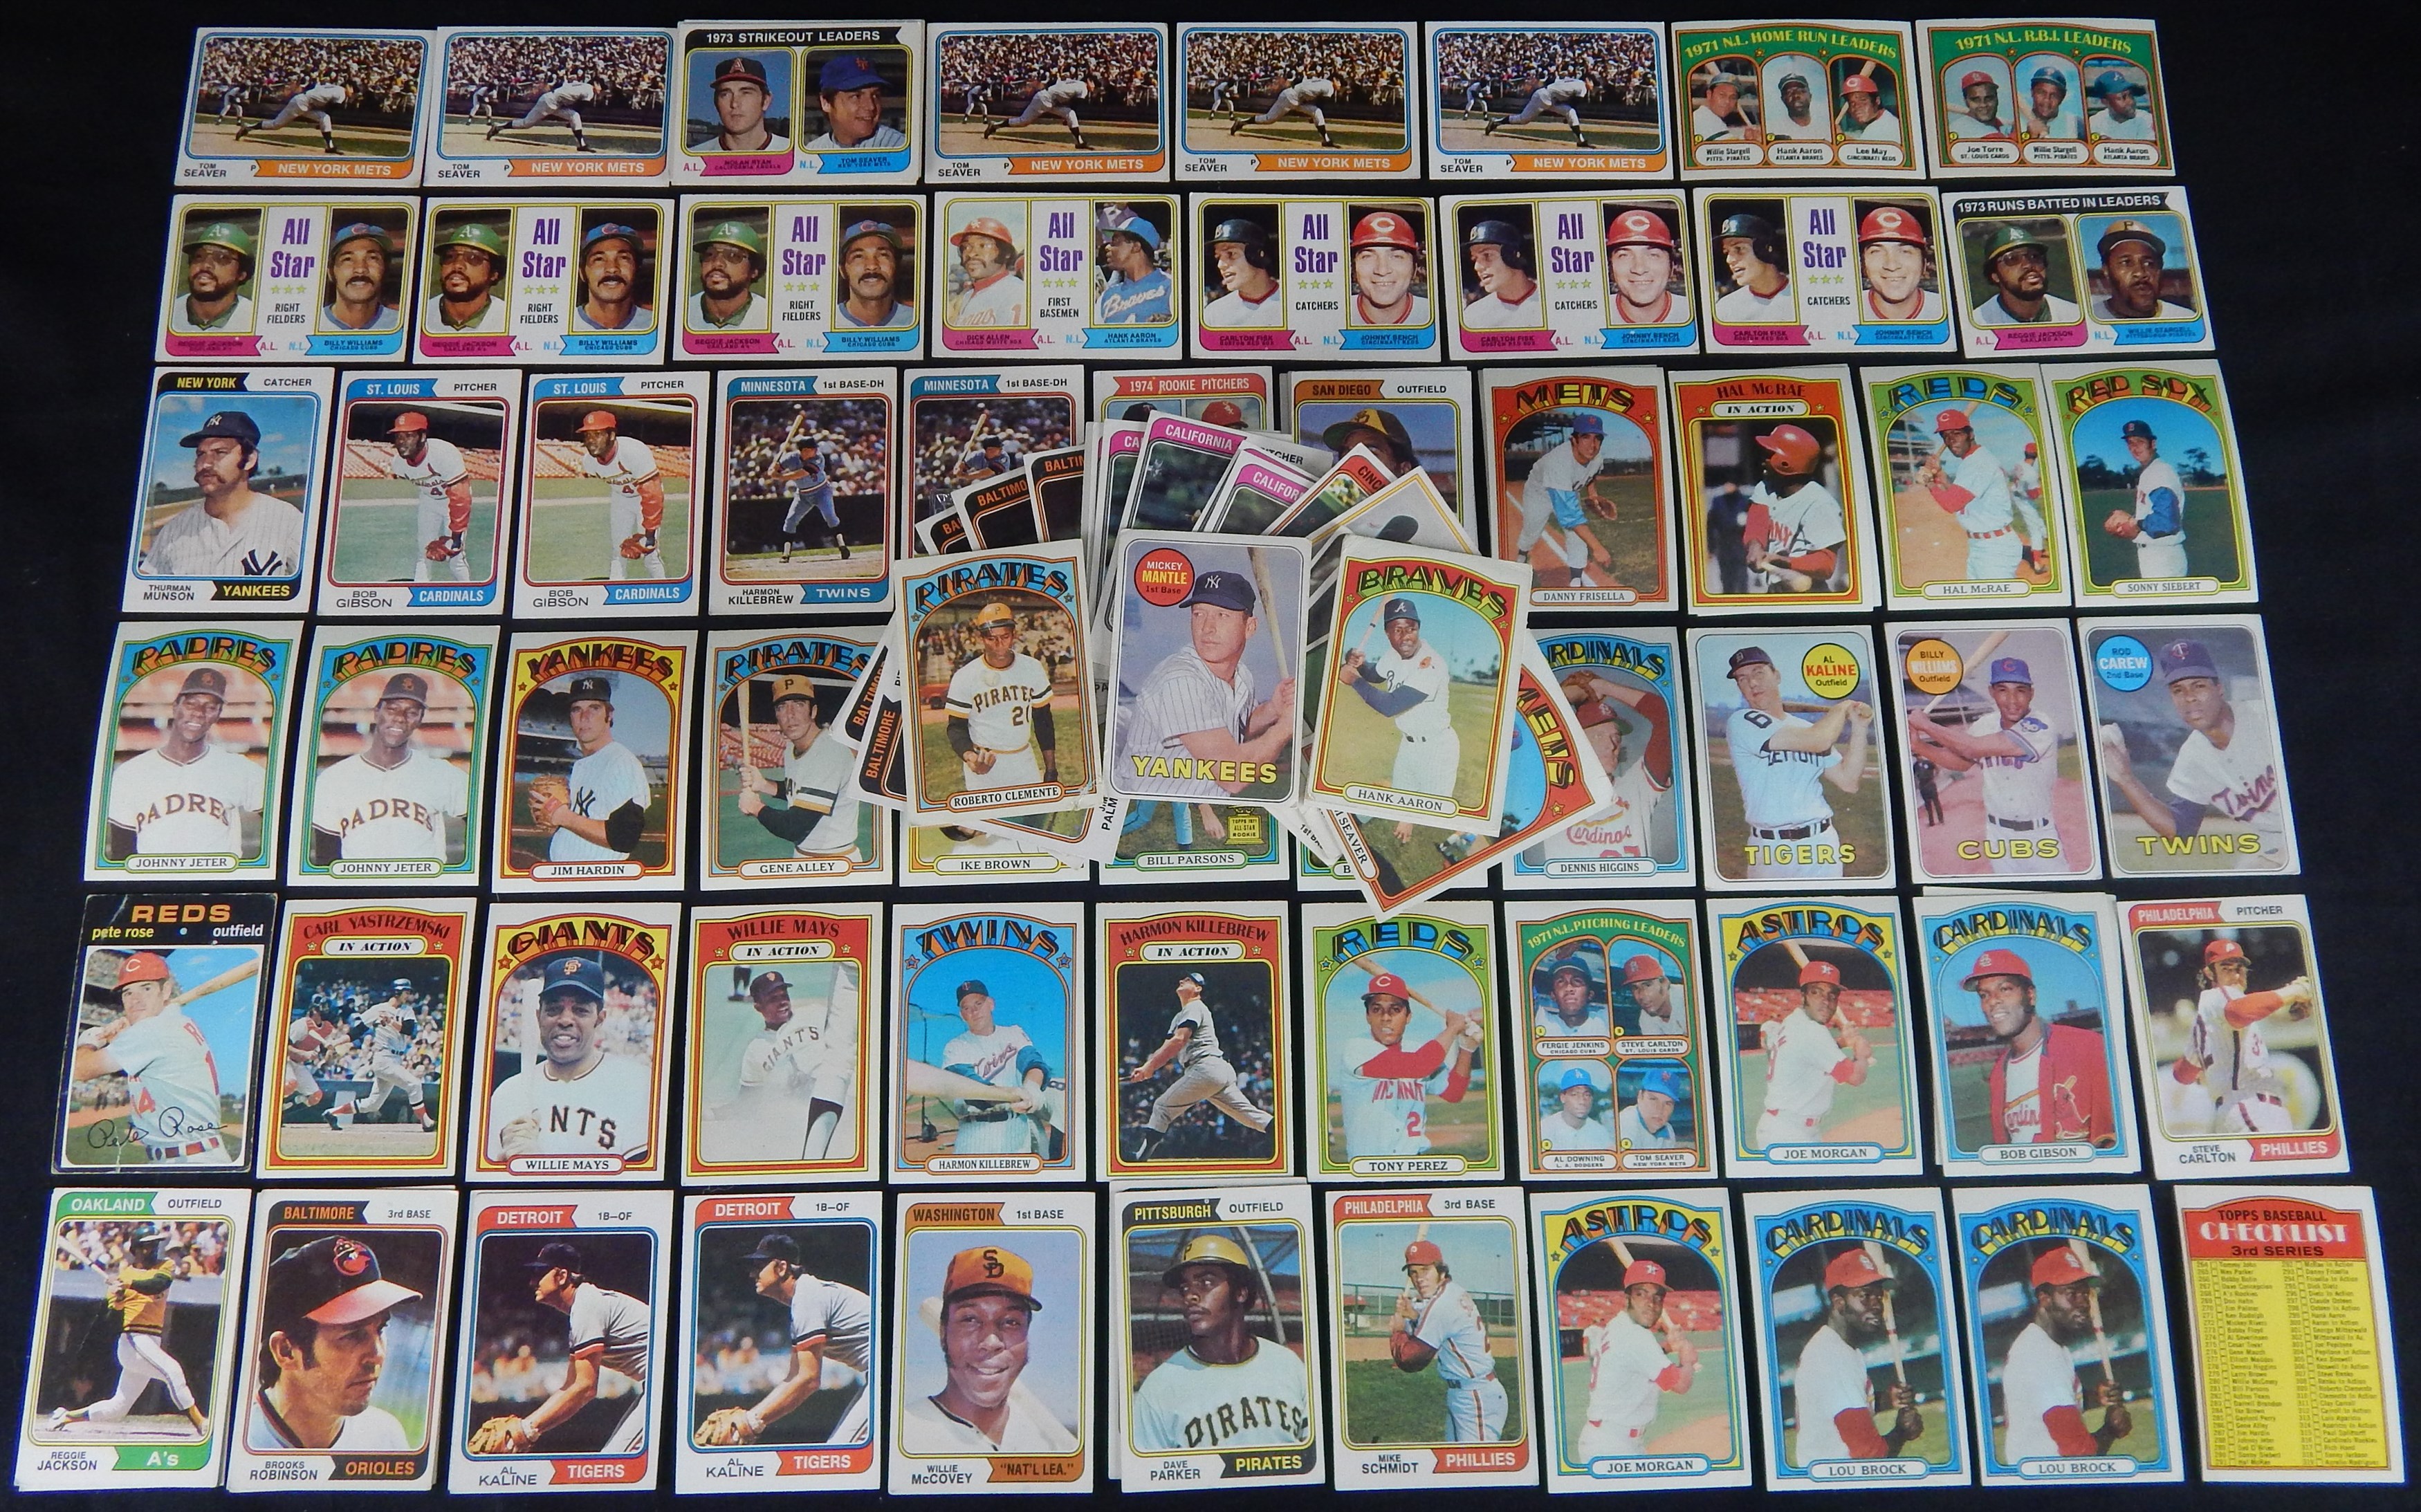 1969-1974 Topps Collection of 1,500+ Cards with Stars Inc. a 1969 Mantle